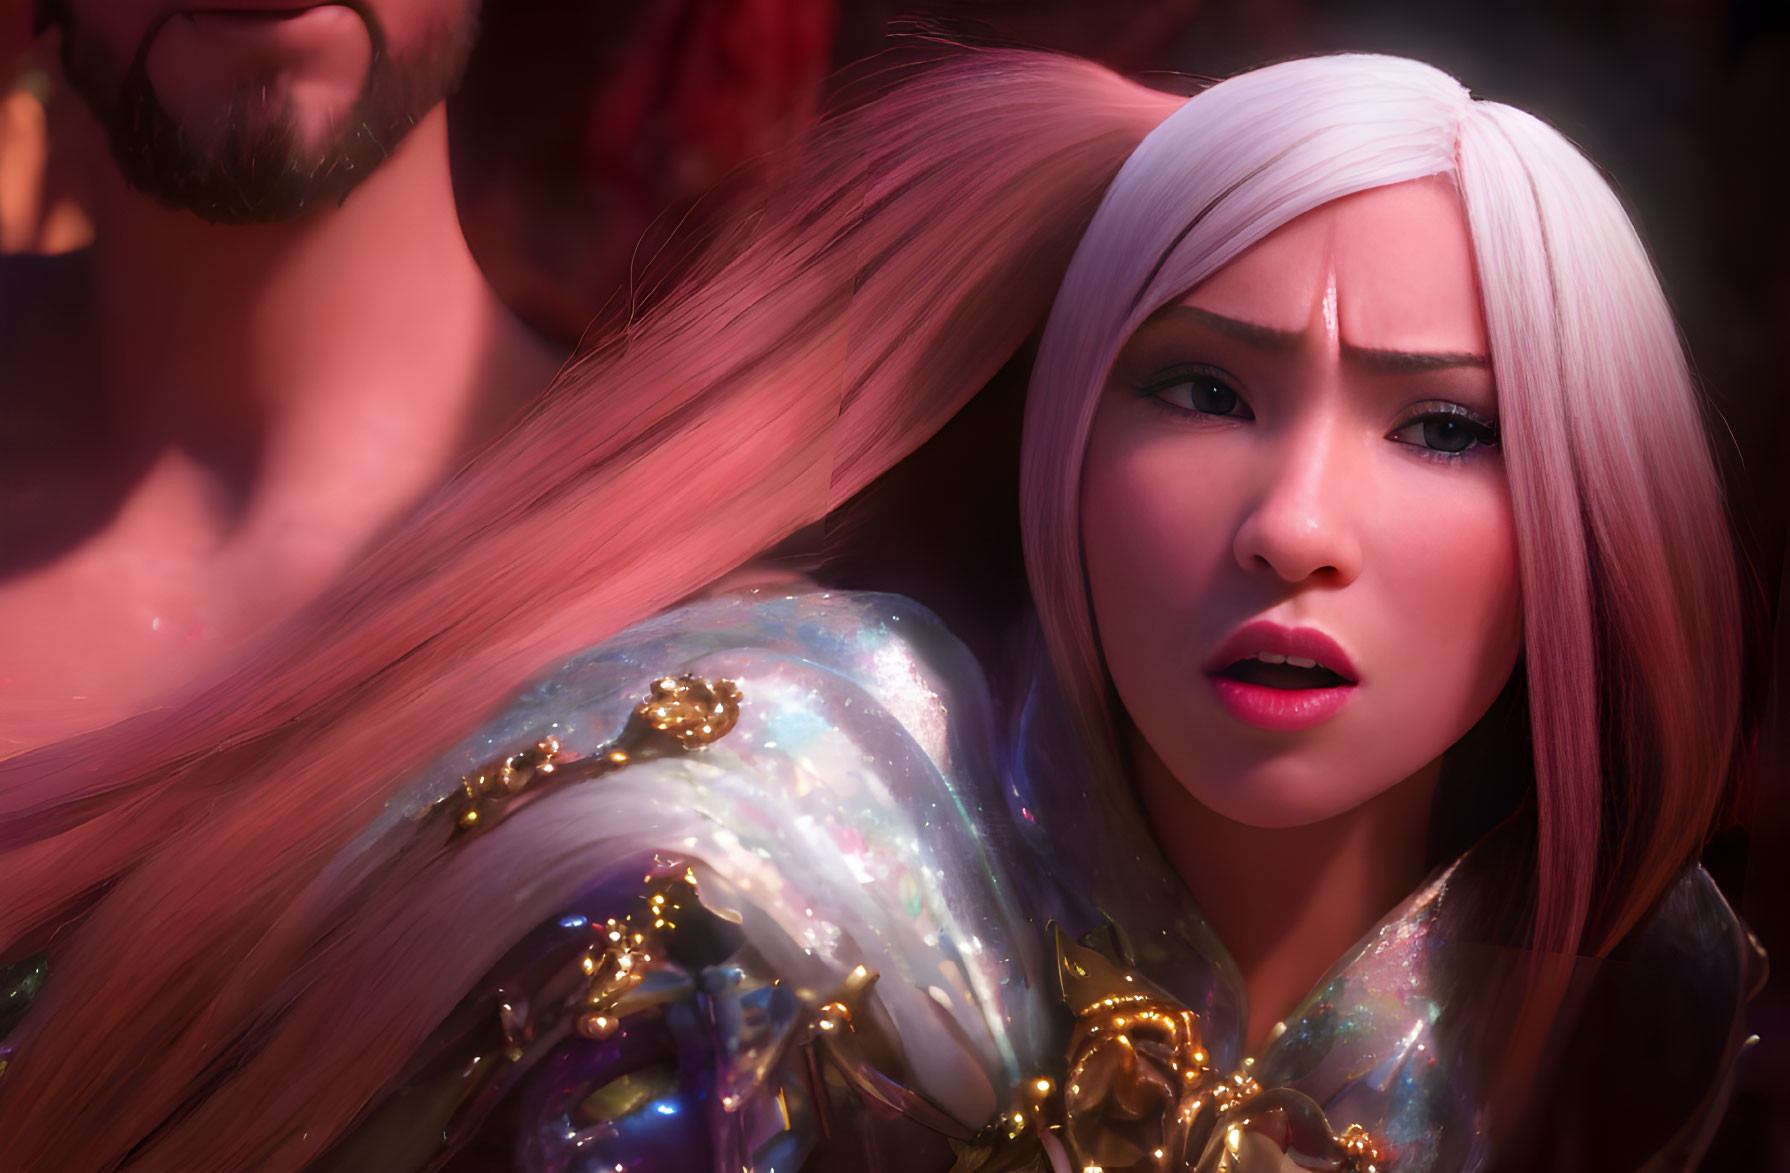 Animated female character with white hair and golden armor in close-up, showing concern with blurry background figure.